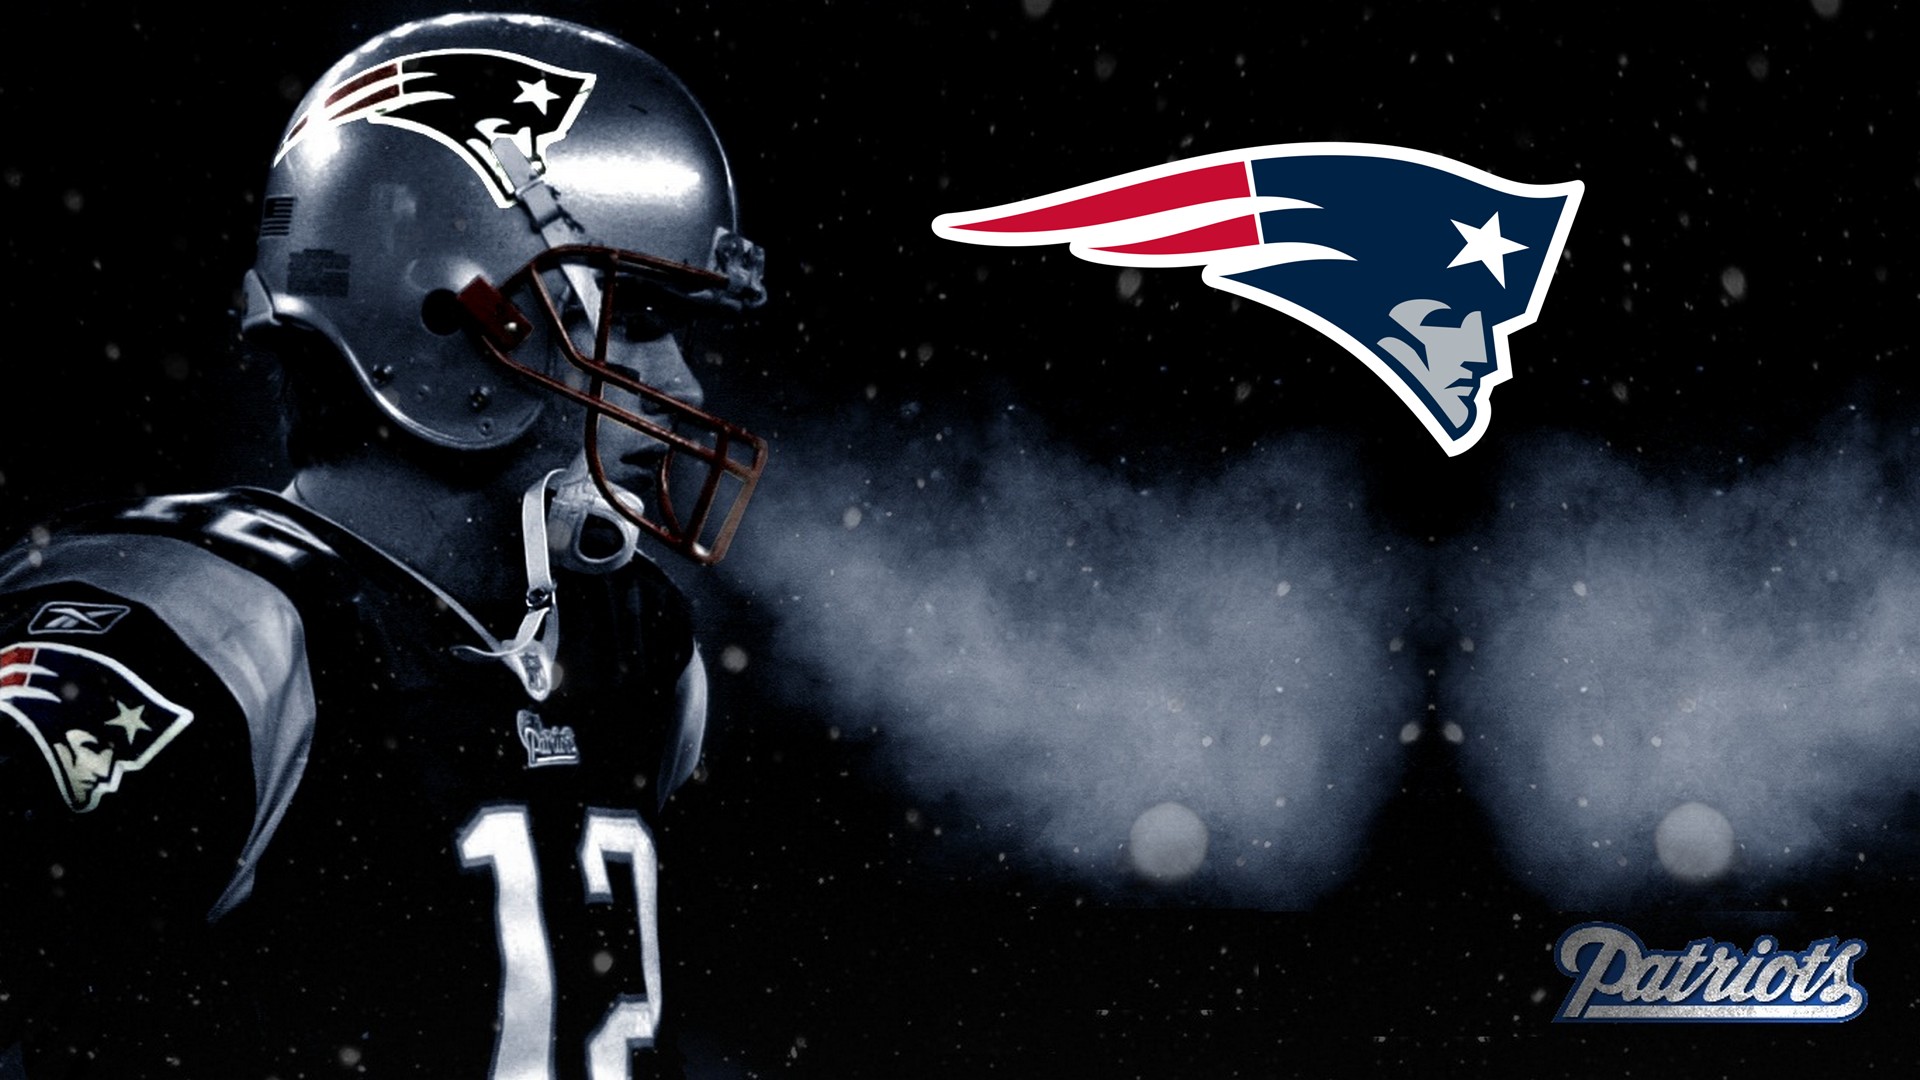 Tom Brady Patriots Wallpaper With Resolution 1920X1080 pixel. You can make this wallpaper for your Mac or Windows Desktop Background, iPhone, Android or Tablet and another Smartphone device for free